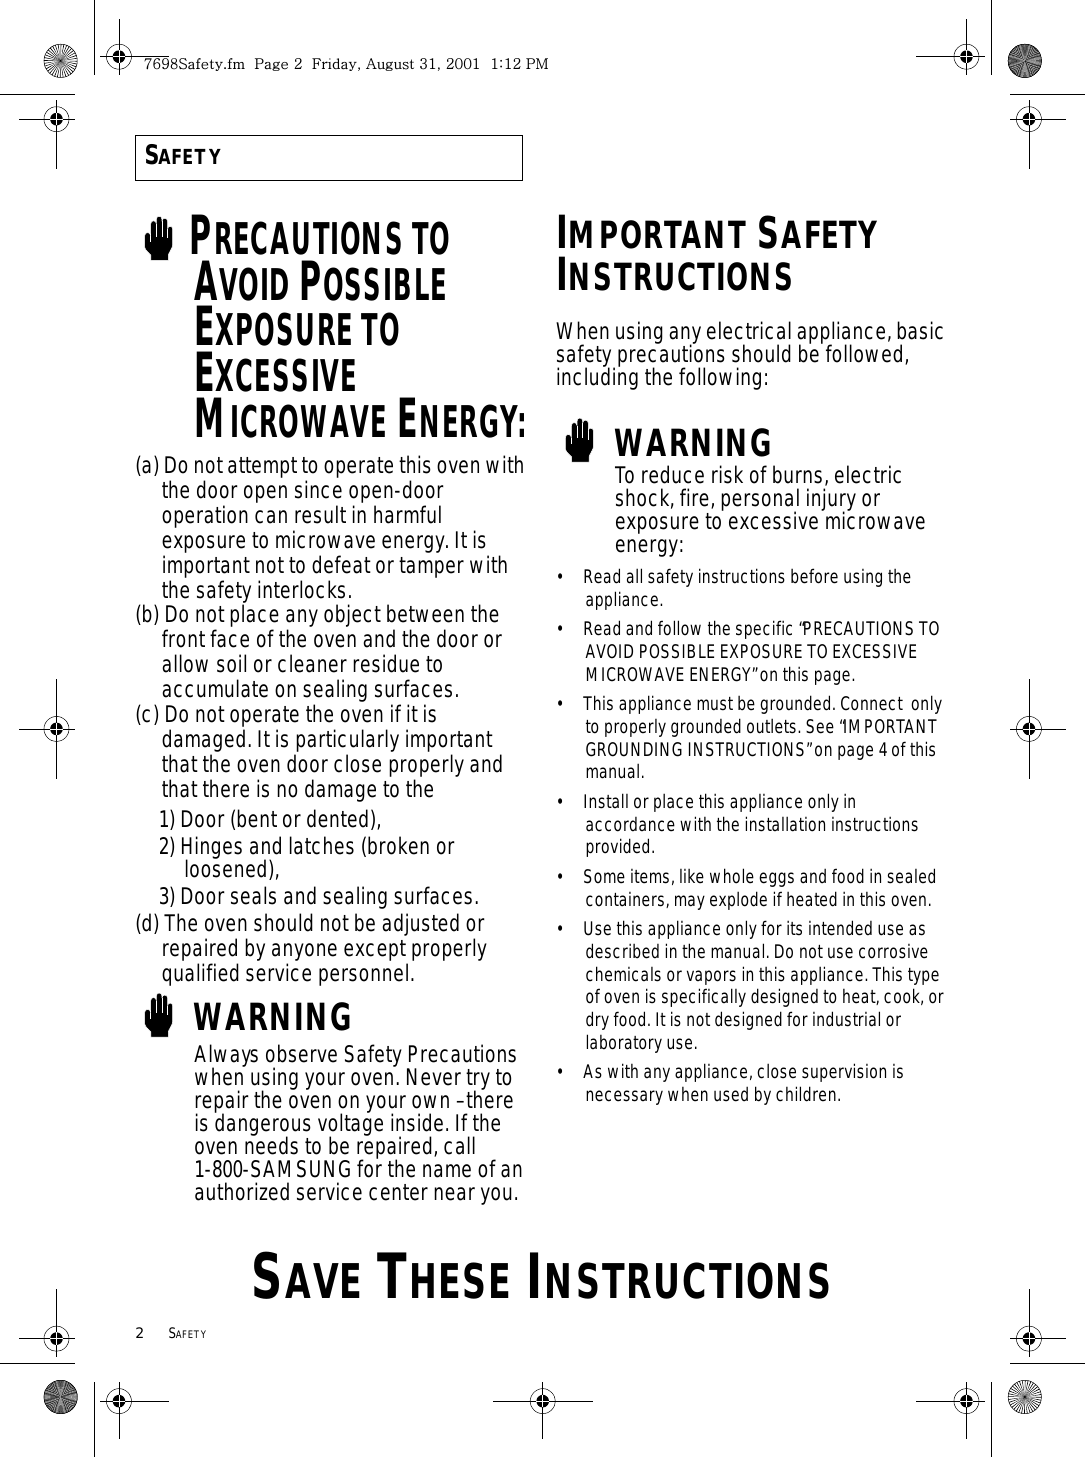 2     SAFETYSAVE THESE INSTRUCTIONSSAFETYPRECAUTIONS TO AVOID POSSIBLE EXPOSURE TO EXCESSIVE MICROWAVE ENERGY:(a) Do not attempt to operate this oven with the door open since open-door operation can result in harmful exposure to microwave energy. It is important not to defeat or tamper with the safety interlocks.(b) Do not place any object between the front face of the oven and the door or allow soil or cleaner residue to accumulate on sealing surfaces.(c) Do not operate the oven if it isdamaged. It is particularly important that the oven door close properly and that there is no damage to the 1) Door (bent or dented),2) Hinges and latches (broken or loosened), 3) Door seals and sealing surfaces.(d) The oven should not be adjusted or repaired by anyone except properly qualified service personnel.WARNINGAlways observe Safety Precautions when using your oven. Never try to repair the oven on your own – there is dangerous voltage inside. If the oven needs to be repaired, call 1-800-SAMSUNG for the name of an authorized service center near you.IMPORTANT SAFETY INSTRUCTIONSWhen using any electrical appliance, basic safety precautions should be followed, including the following:WARNINGTo reduce risk of burns, electric shock, fire, personal injury or exposure to excessive microwave energy:• Read all safety instructions before using the appliance.• Read and follow the specific “PRECAUTIONS TO AVOID POSSIBLE EXPOSURE TO EXCESSIVE MICROWAVE ENERGY” on this page.• This appliance must be grounded. Connect  only to properly grounded outlets. See “IMPORTANT  GROUNDING INSTRUCTIONS” on page 4 of this manual.  • Install or place this appliance only in accordance with the installation instructions provided.• Some items, like whole eggs and food in sealed containers, may explode if heated in this oven.• Use this appliance only for its intended use as described in the manual. Do not use corrosive chemicals or vapors in this appliance. This type of oven is specifically designed to heat, cook, or dry food. It is not designed for industrial or laboratory use.• As with any appliance, close supervision is necessary when used by children.^]`_zUGGwGYGGmSGhGZXSGYWWXGGXaXYGwt